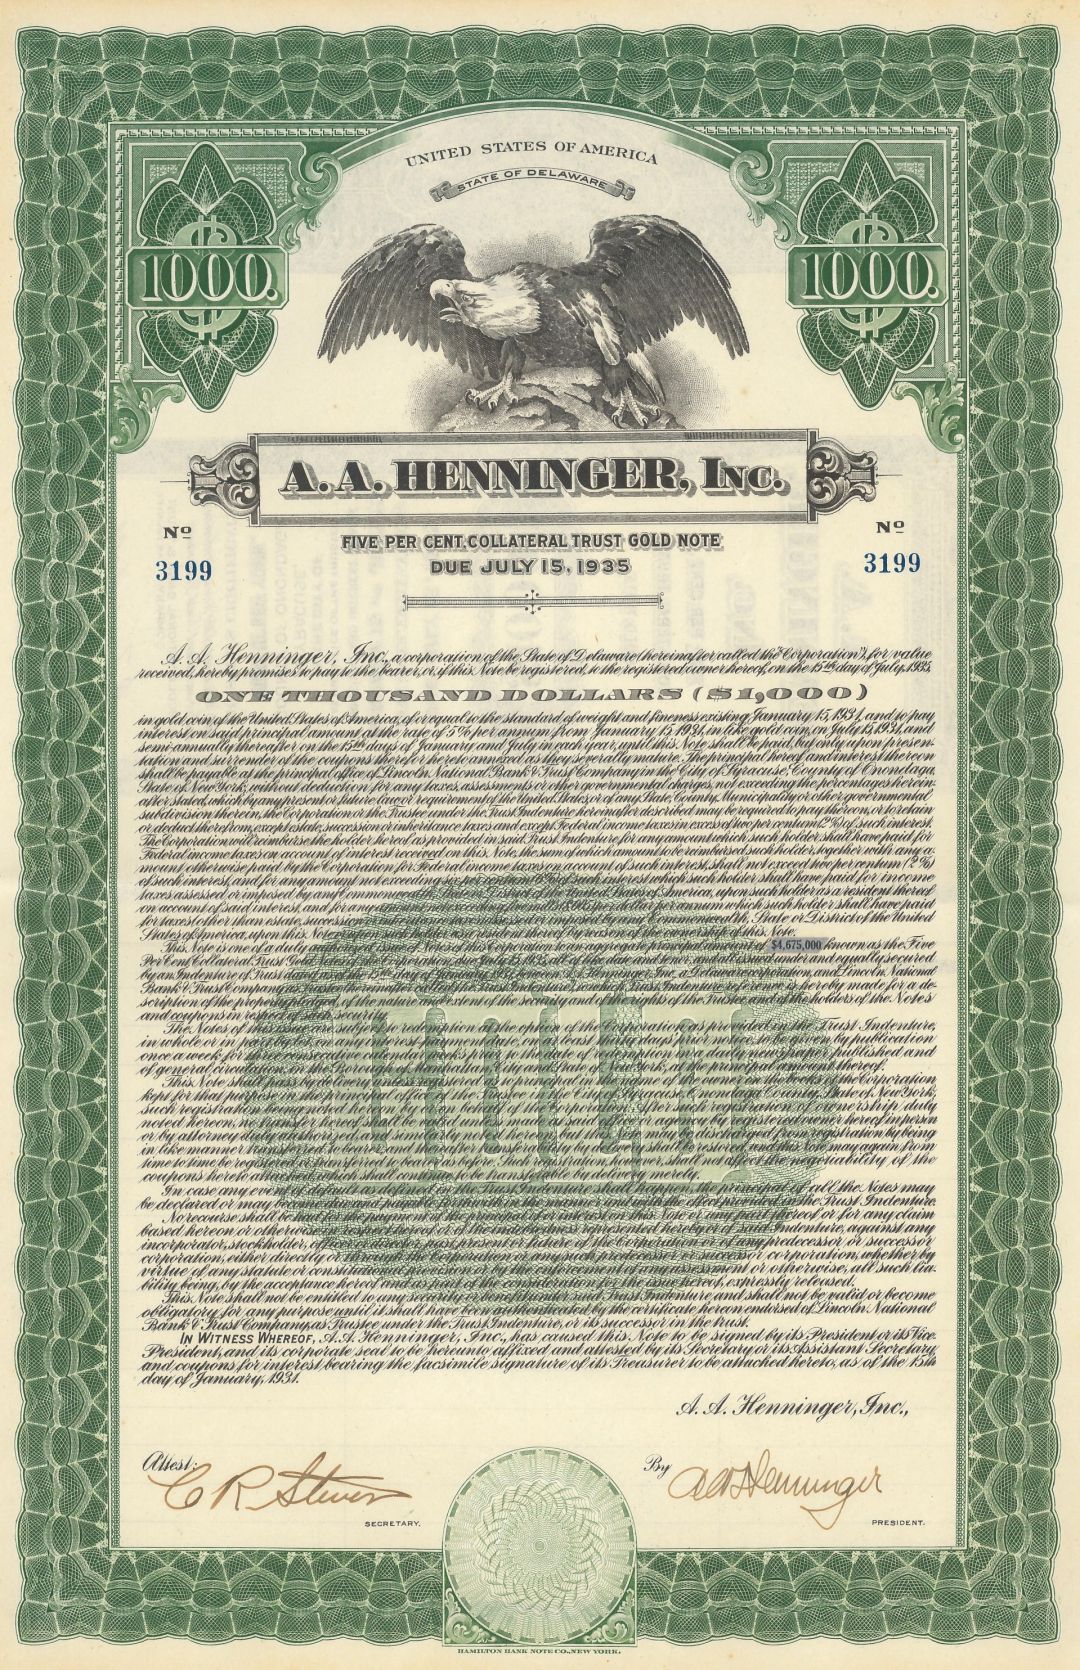 A.A. Henninger, Inc. - 1931 dated $1,000 Gold Bond (Uncanceled) - More Research is Needed of the Company